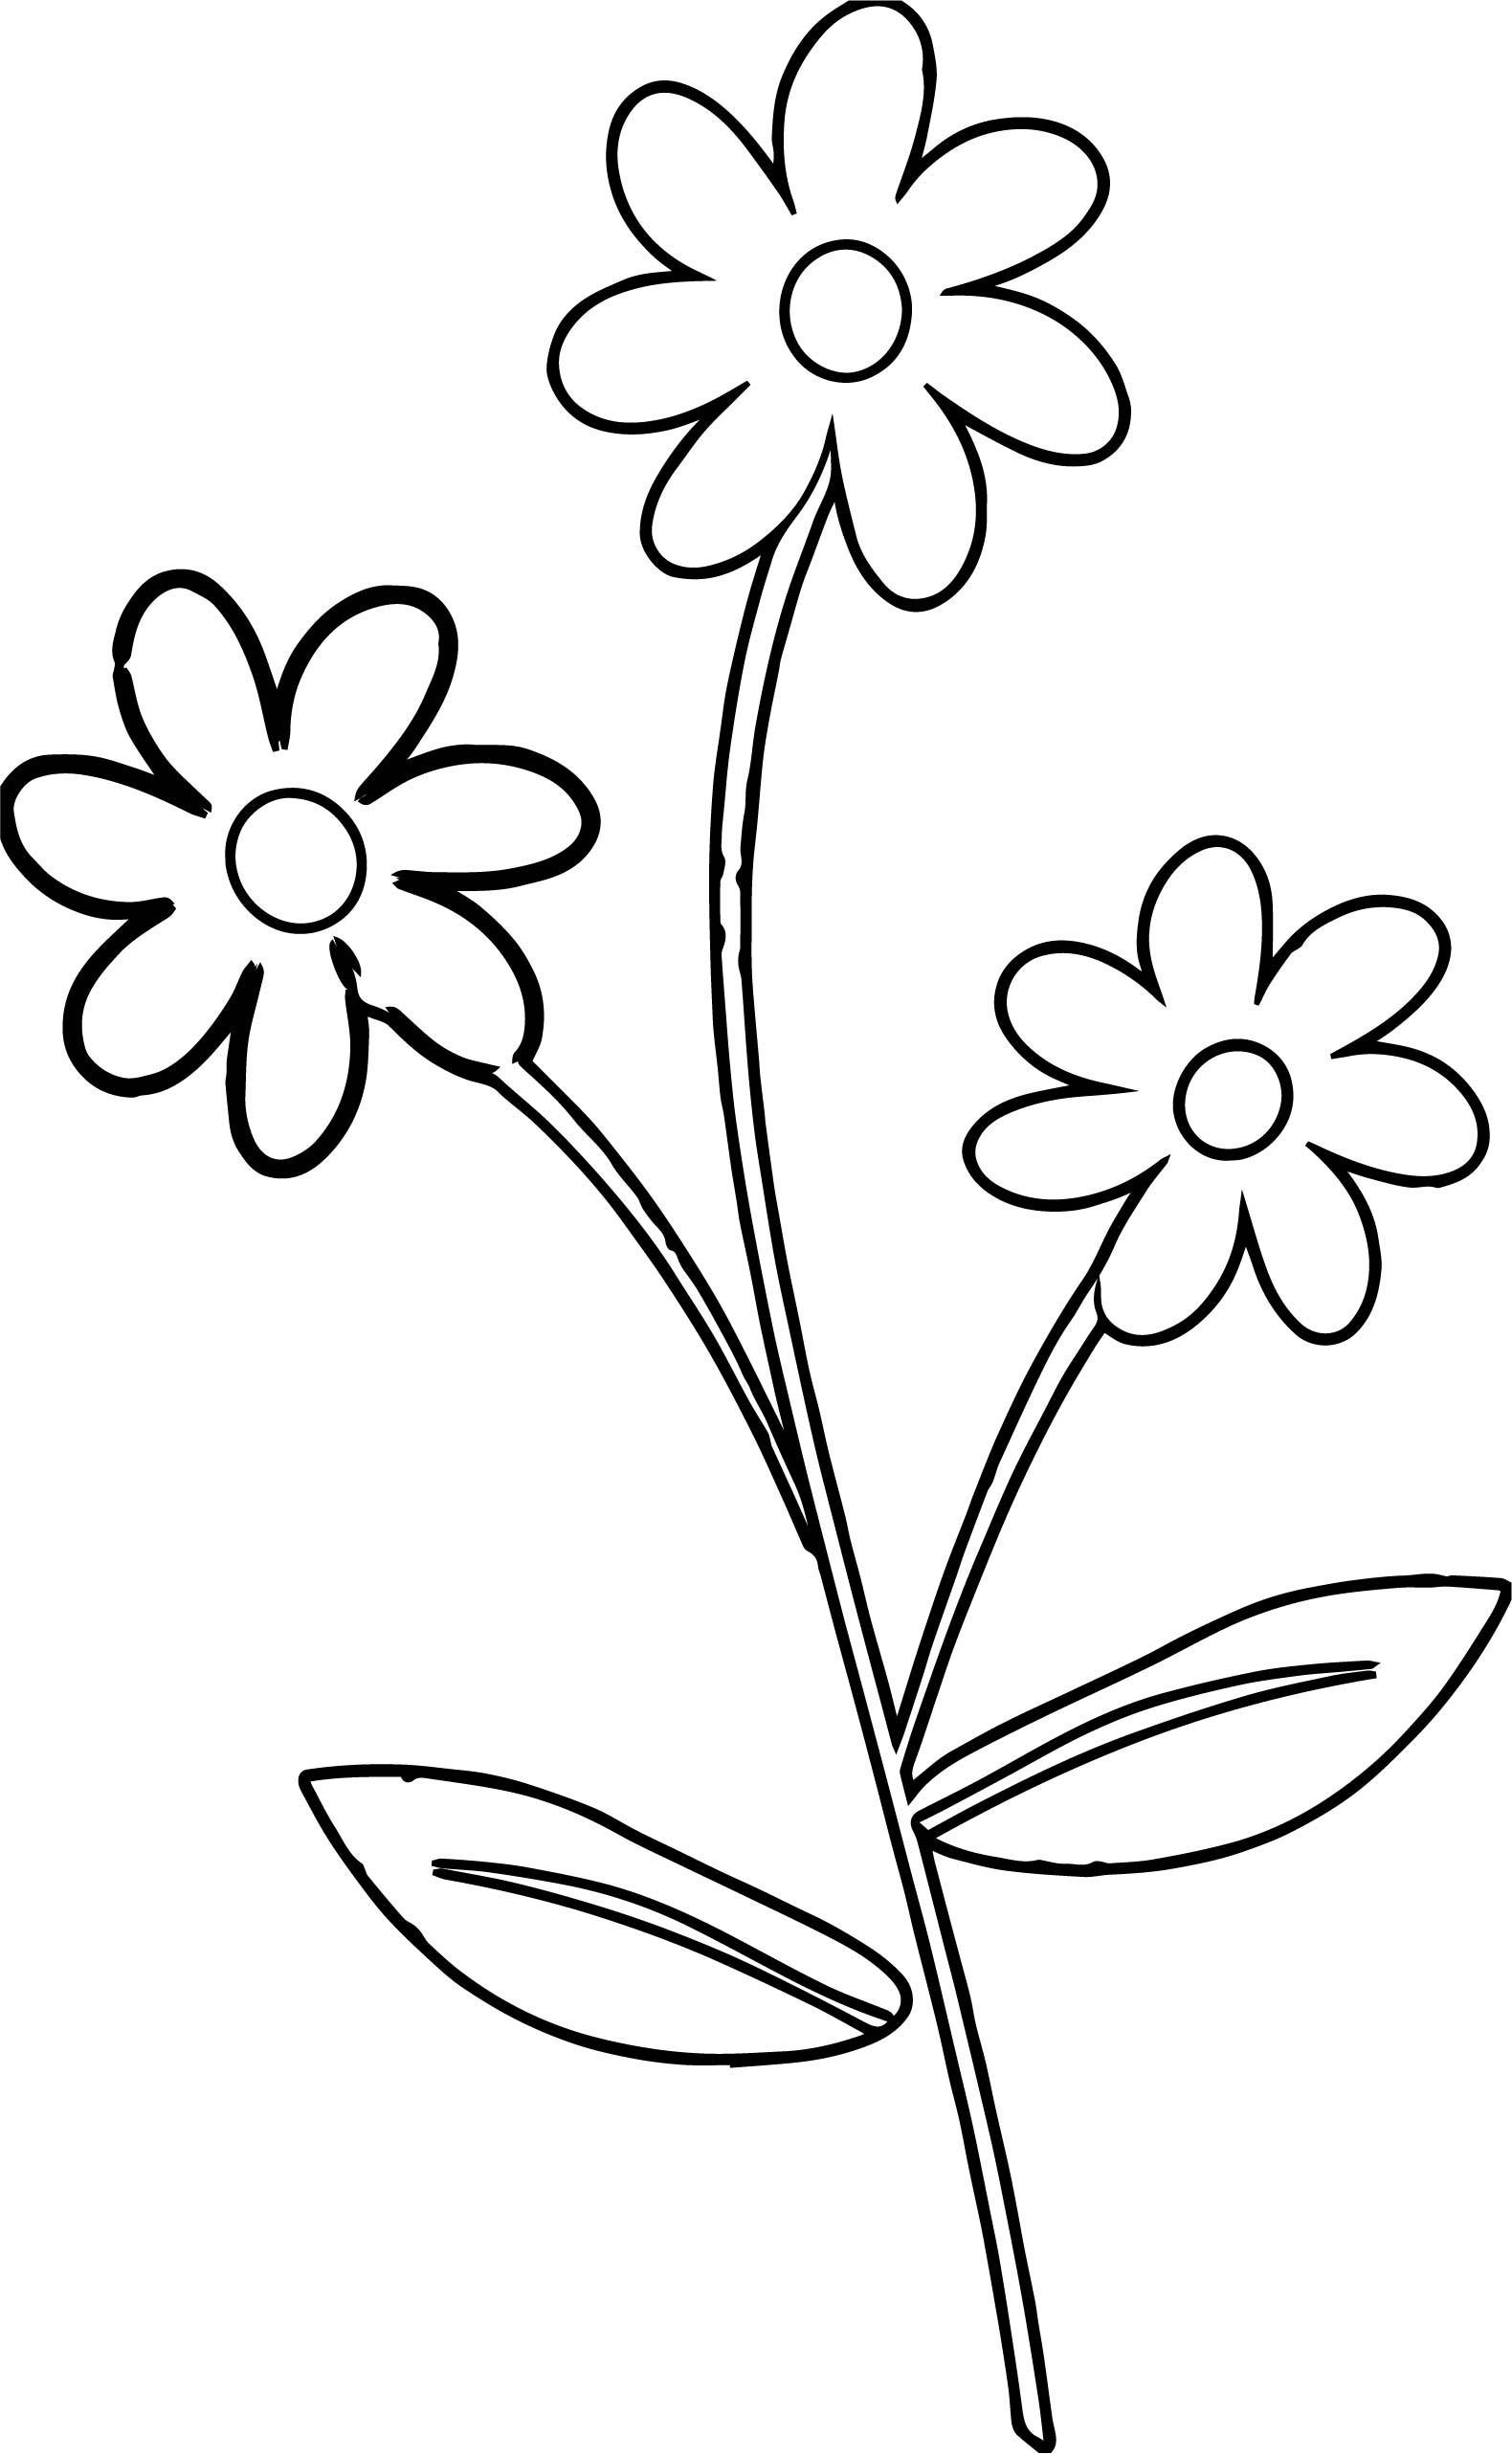 Flower Border Coloring Pages at GetColorings.com | Free printable ...